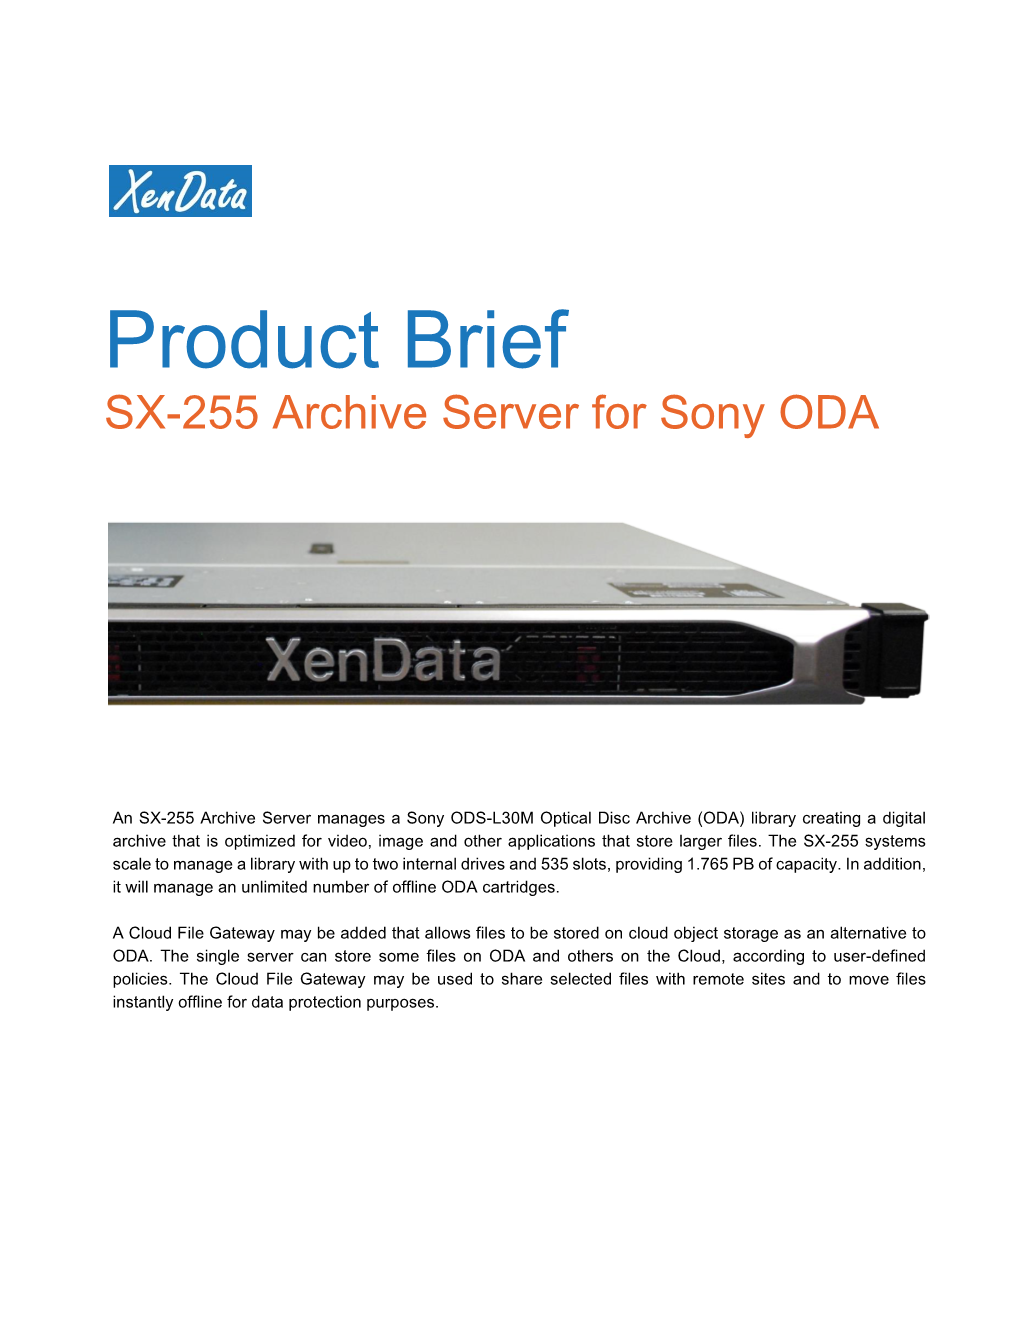 SX-255 for ODA Product Brief